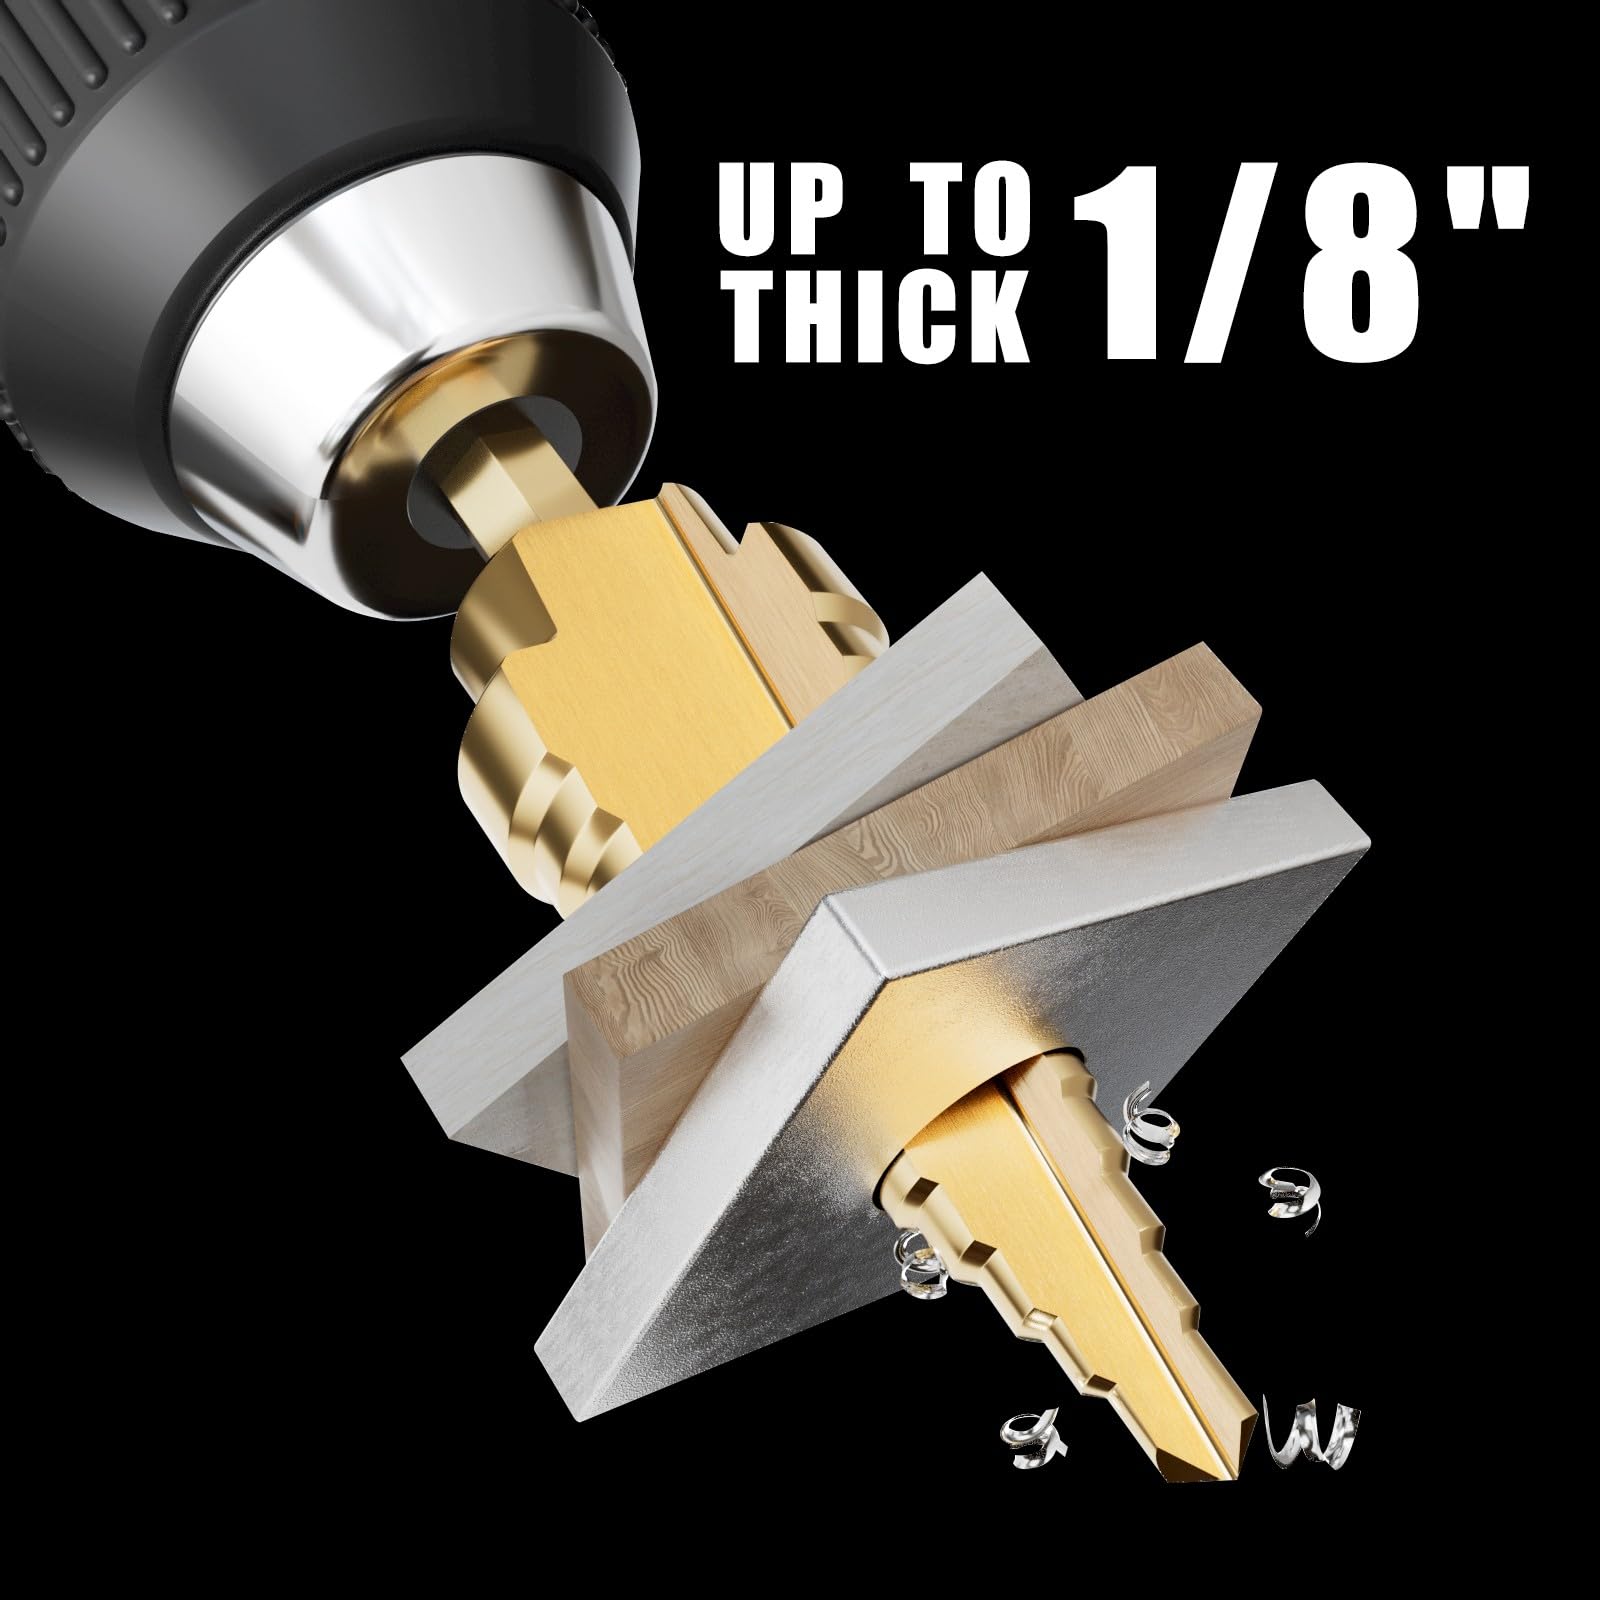 Vearter HSS Straight Groove Step Drill Bits, 1/8" - 1/2" Unibit 13 Steps M2 Material Titanium Coated Hex Shank for Drilling Holes in Stainless Steel Aluminium Sheet Metal Wood Plastic PVC